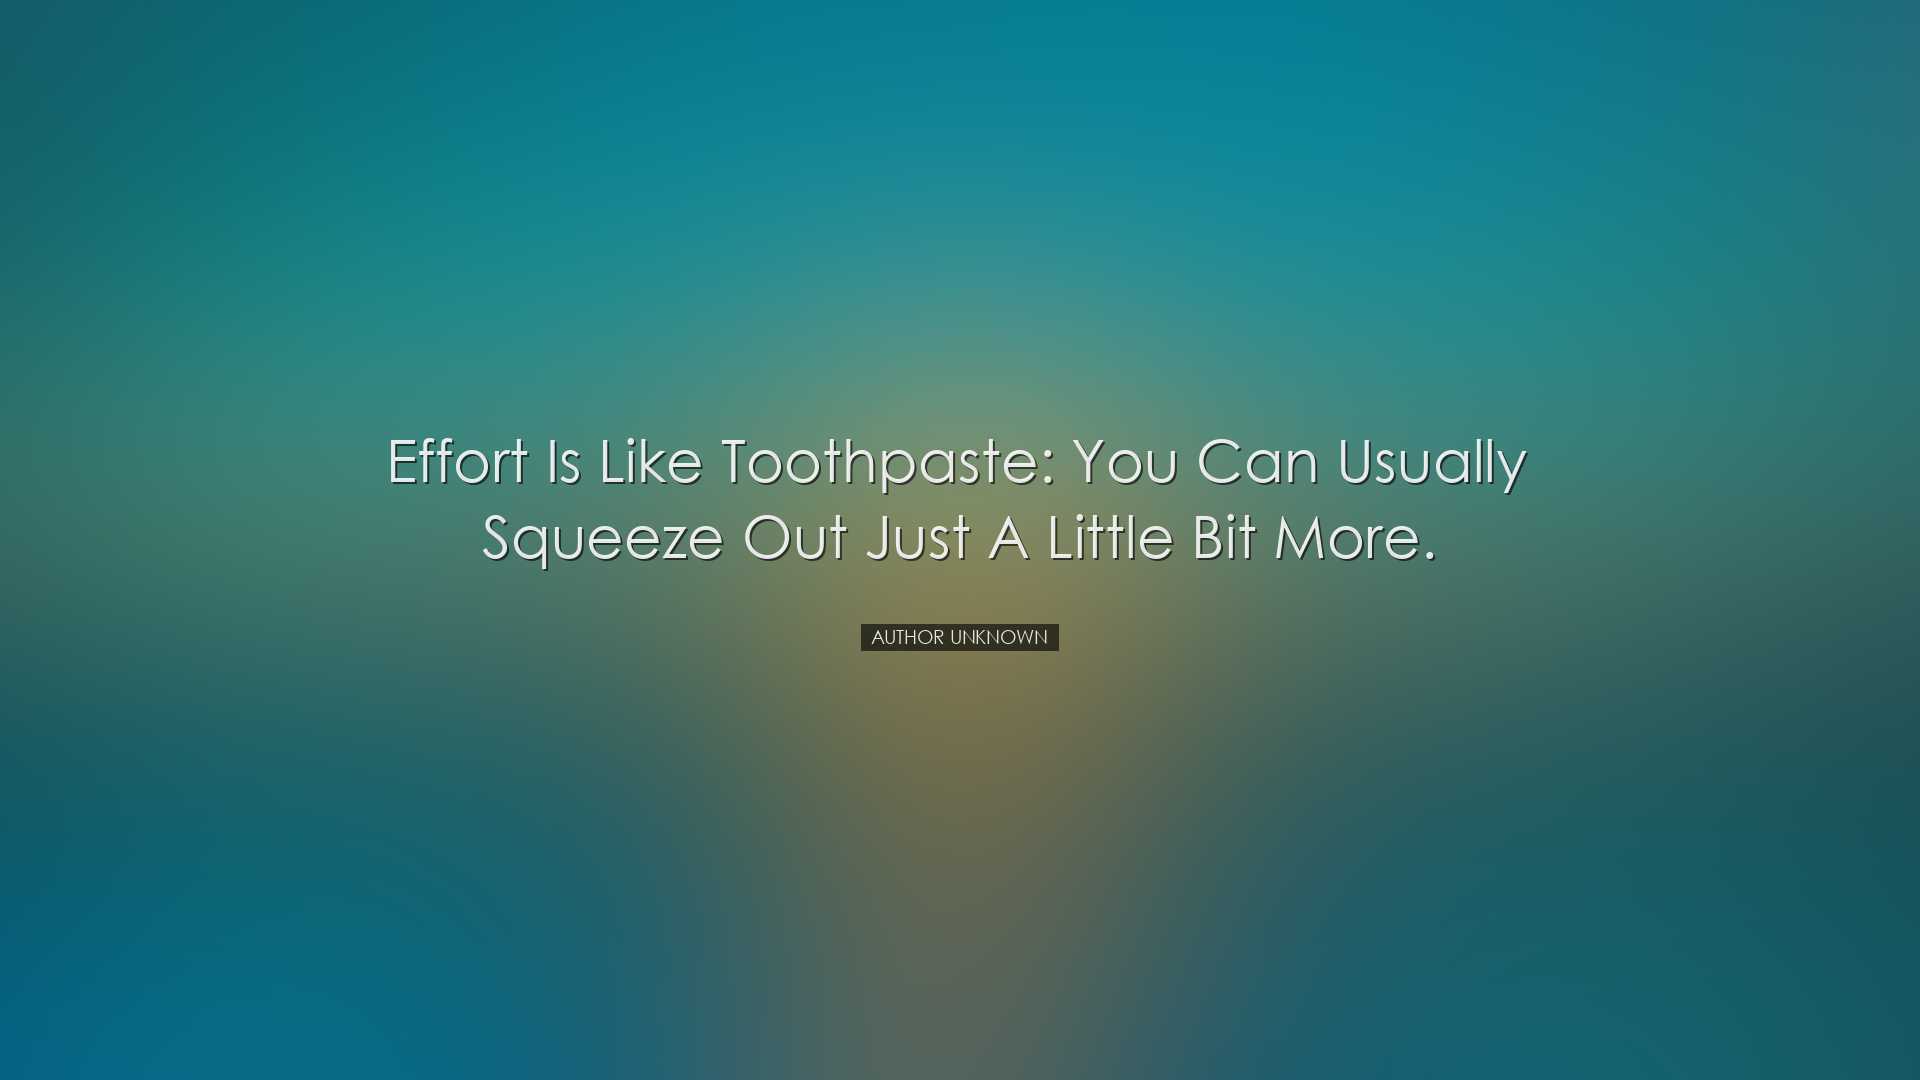 Effort is like toothpaste: you can usually squeeze out just a litt